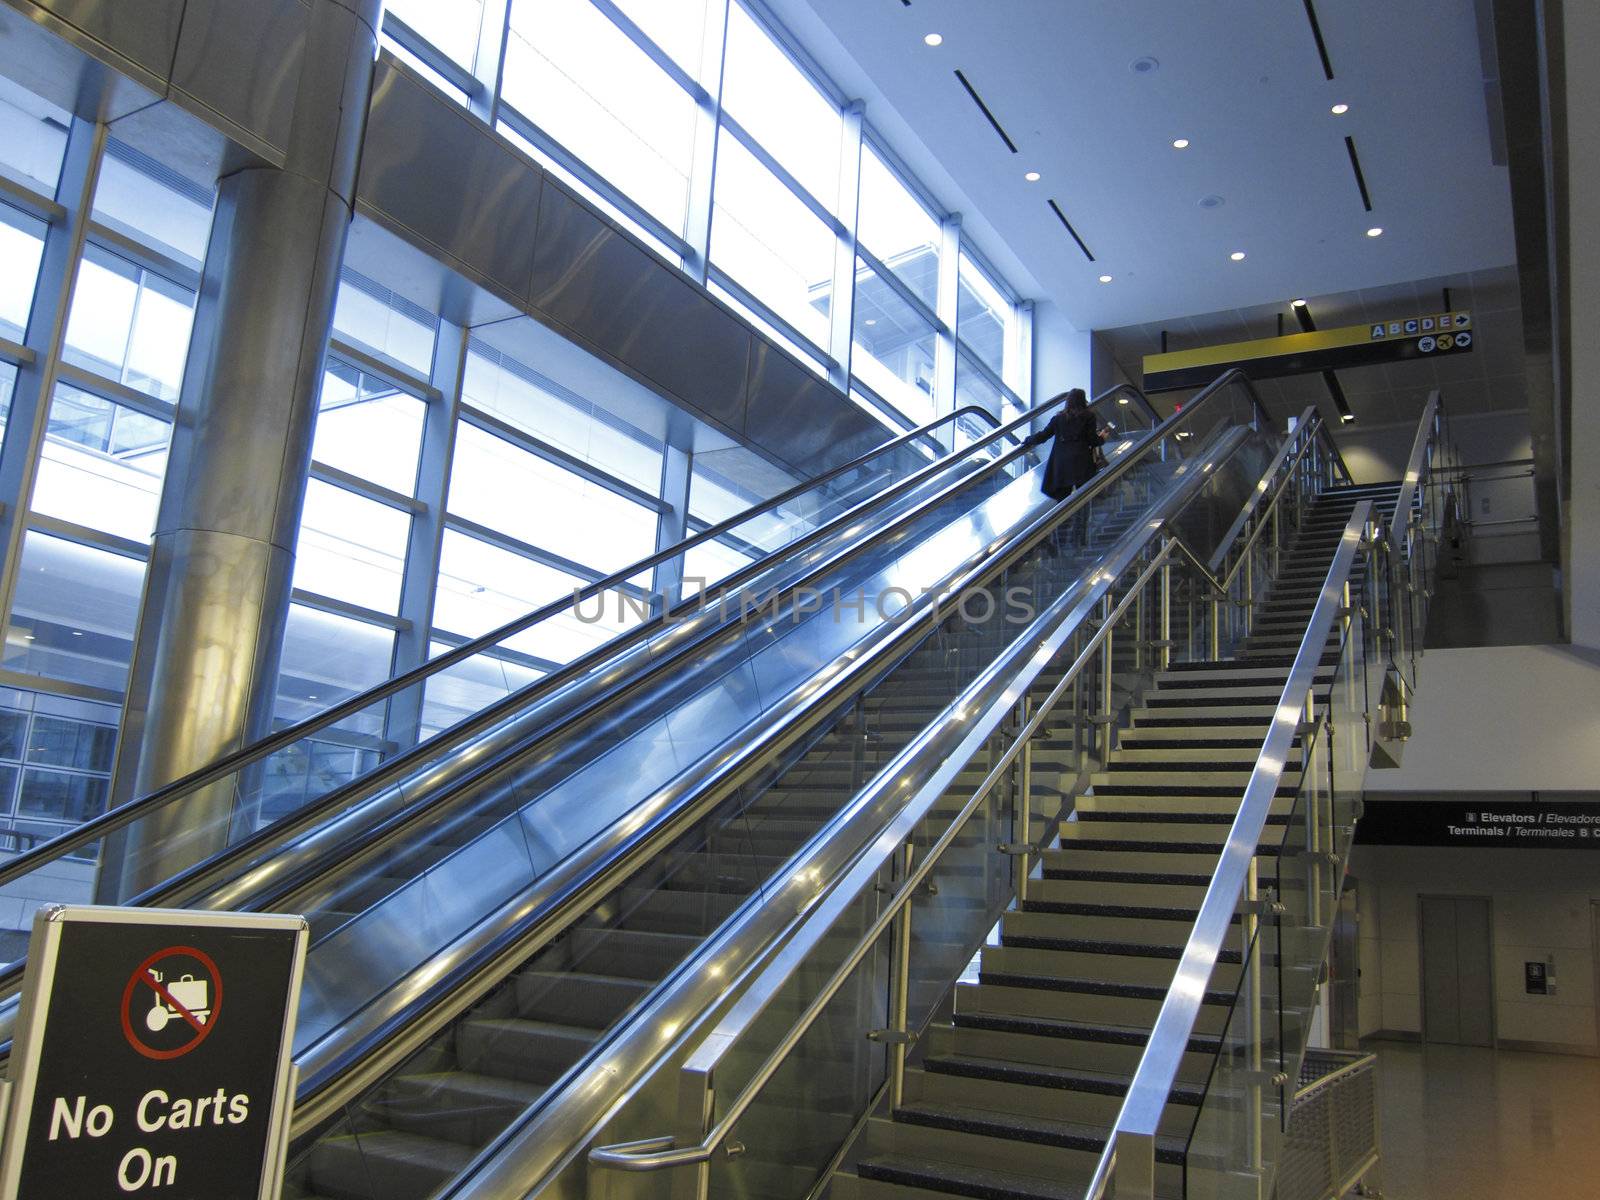 Stairs and escalator at Houston international airport